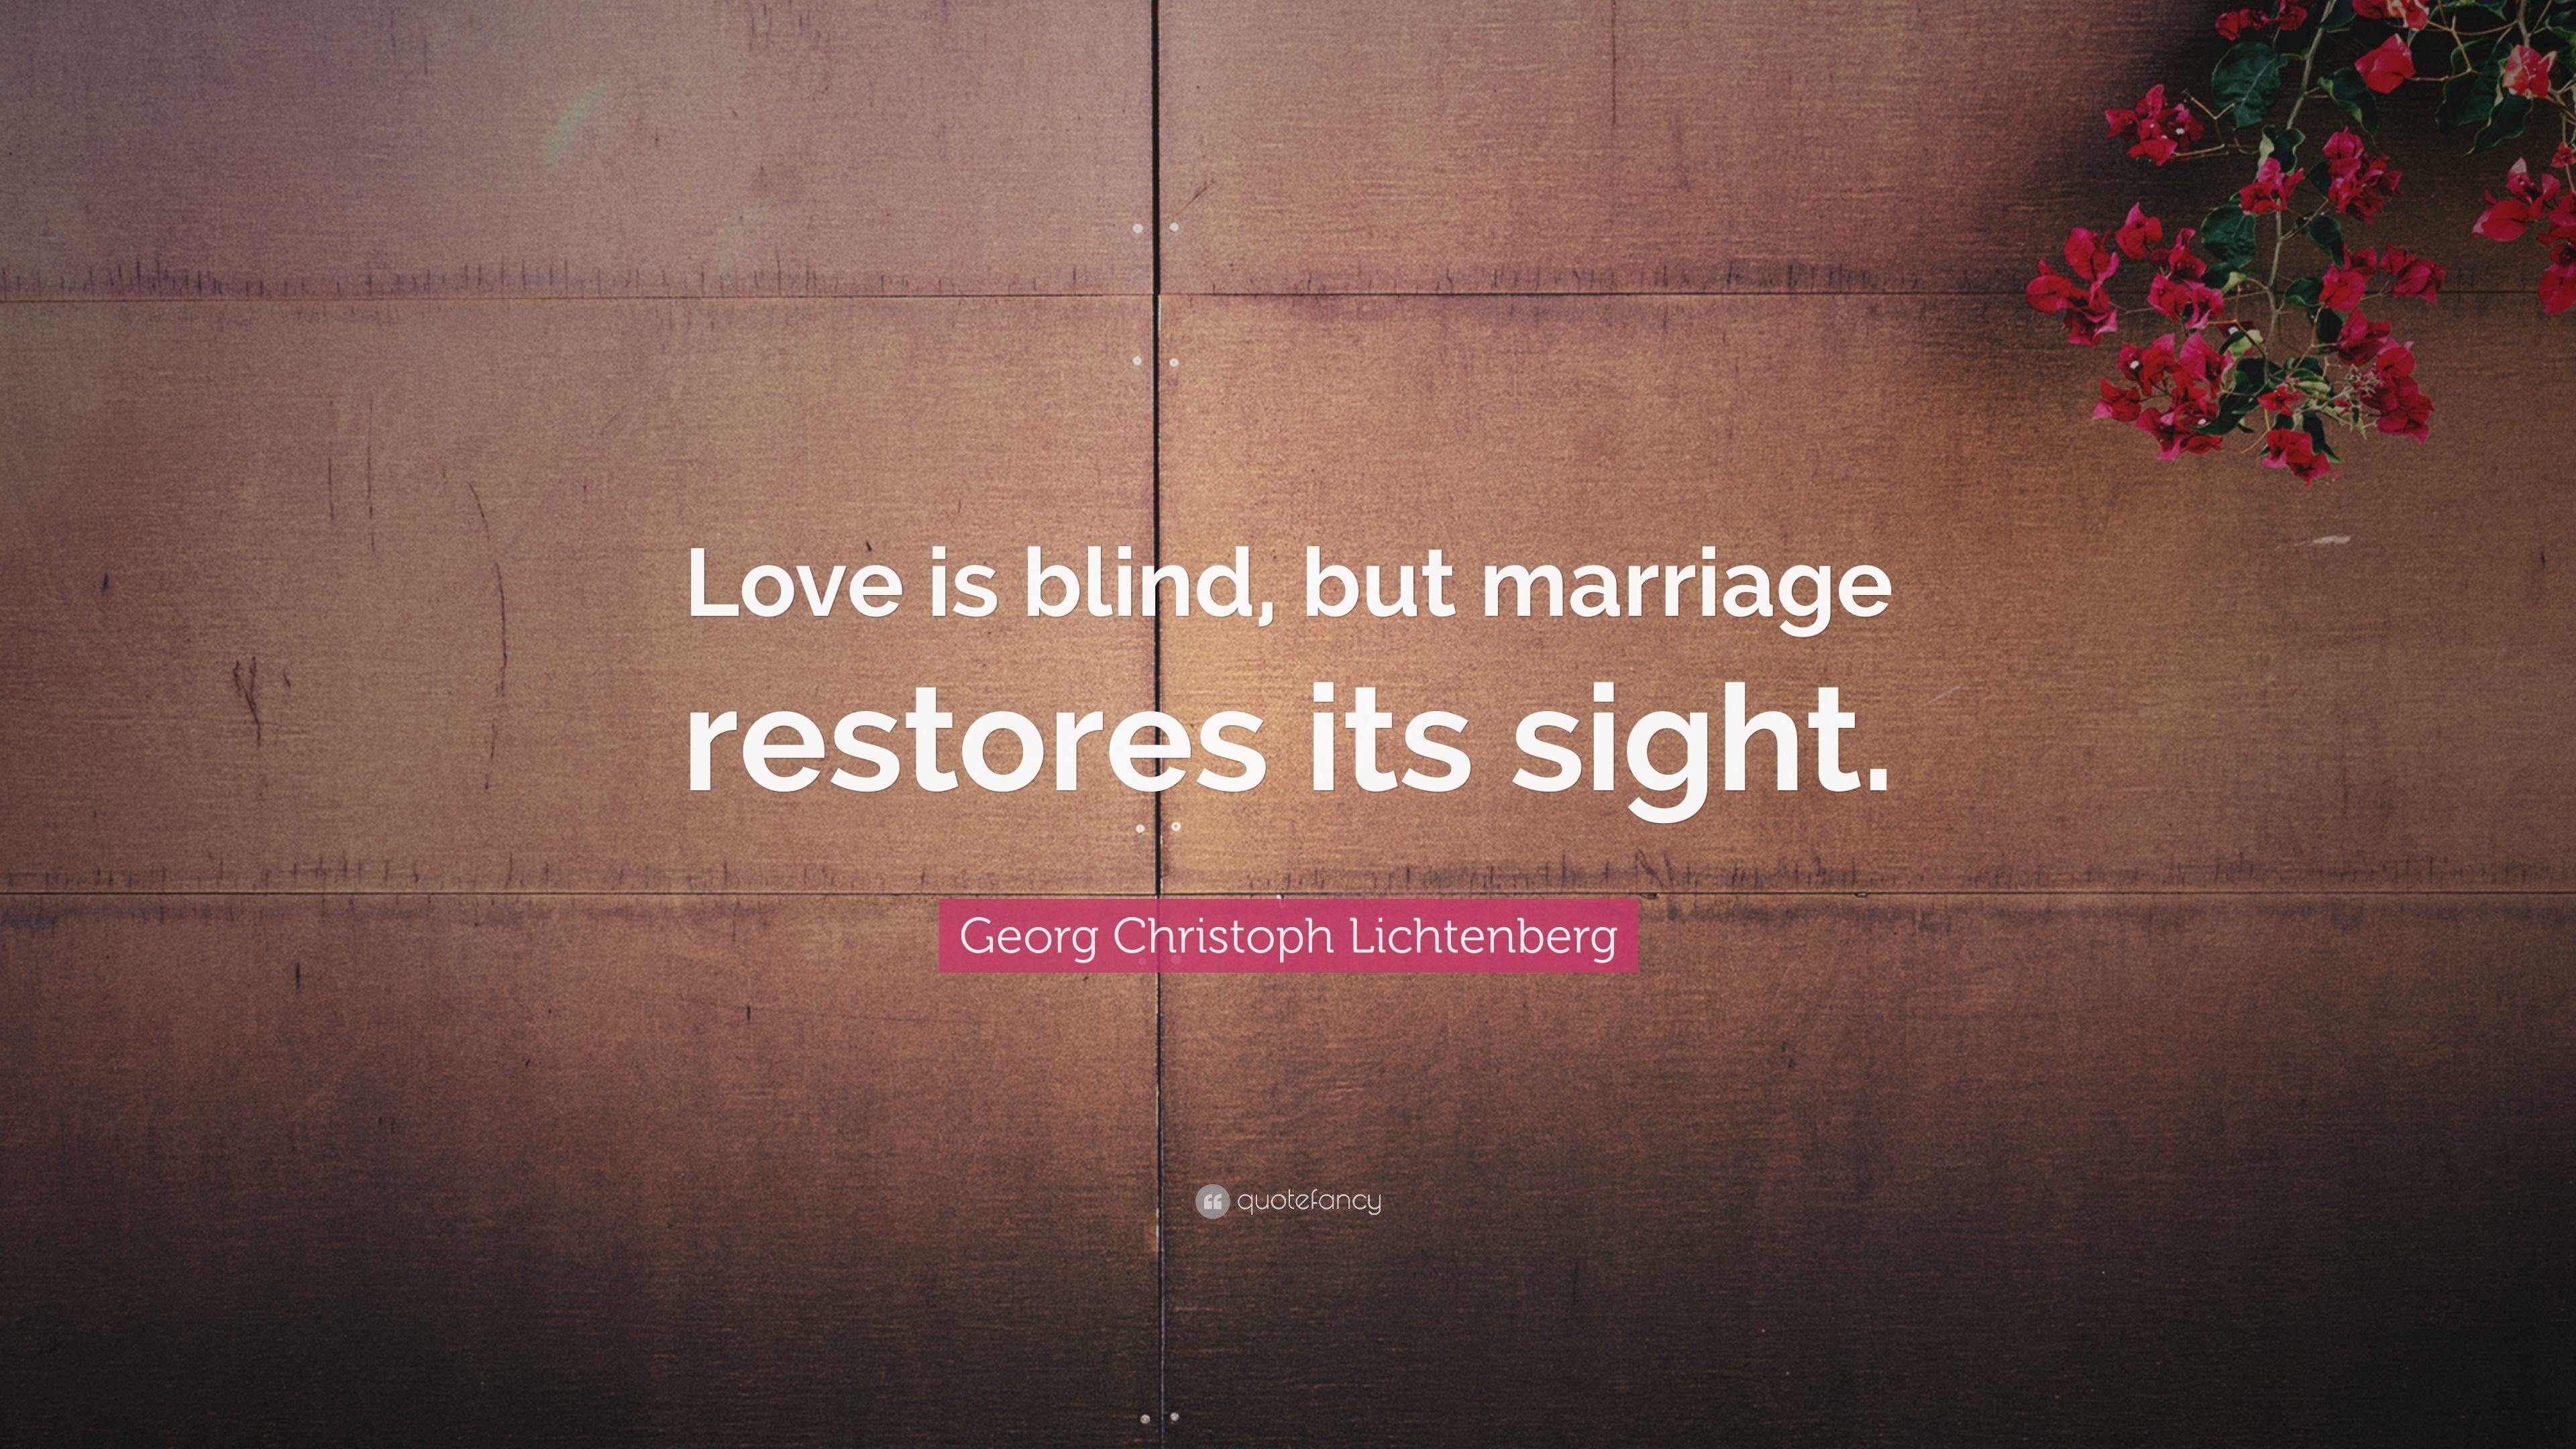 Georg Christoph Lichtenberg Quote: “Love is blind, but marriage